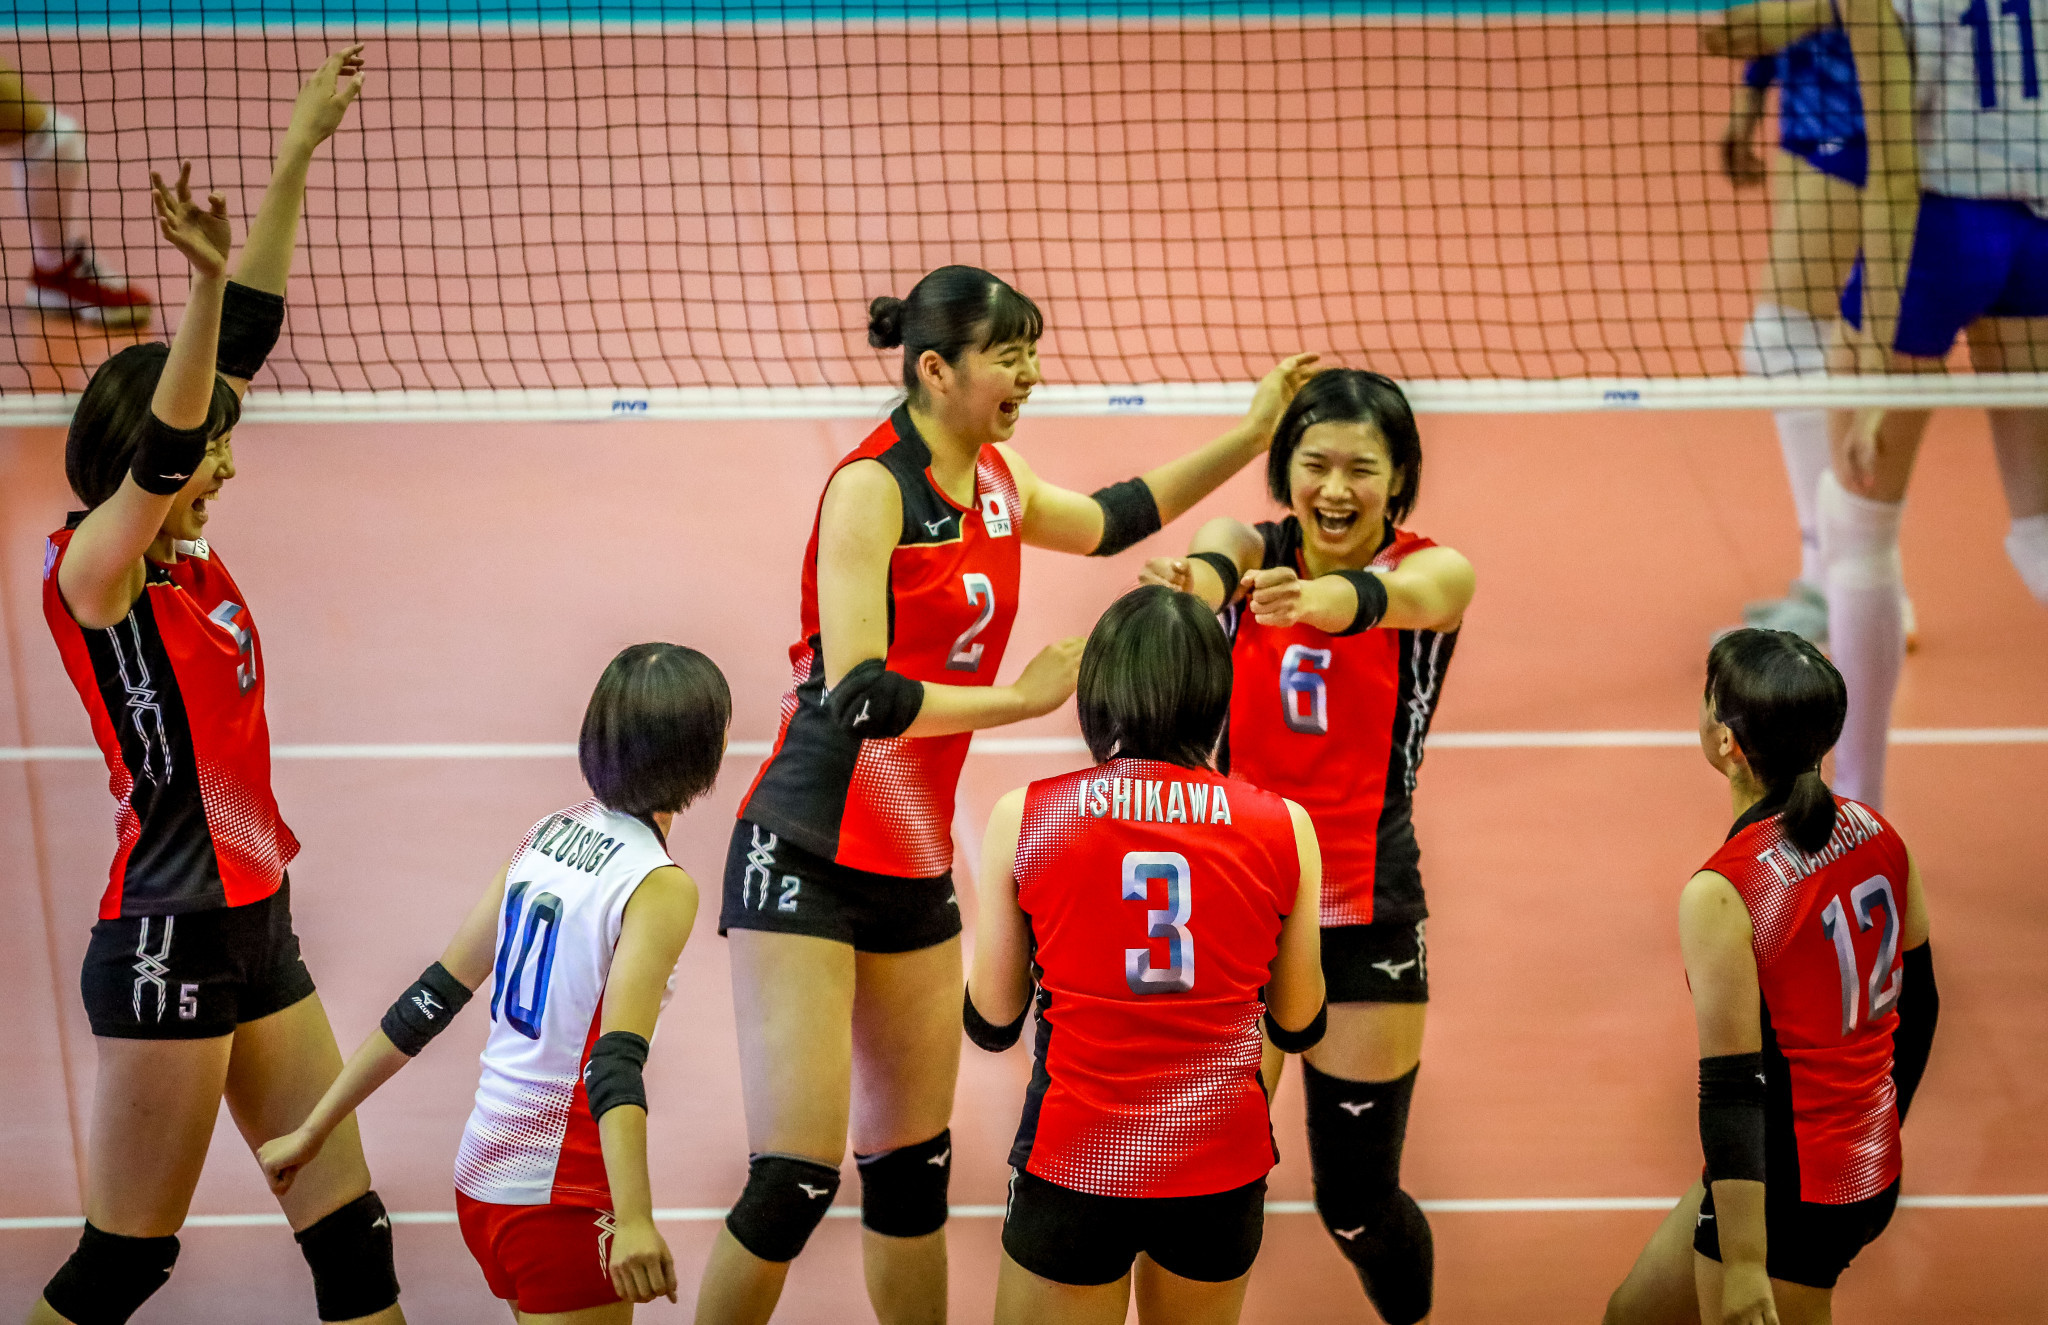 Japan knocked out Russia to reach the final ©FIVB